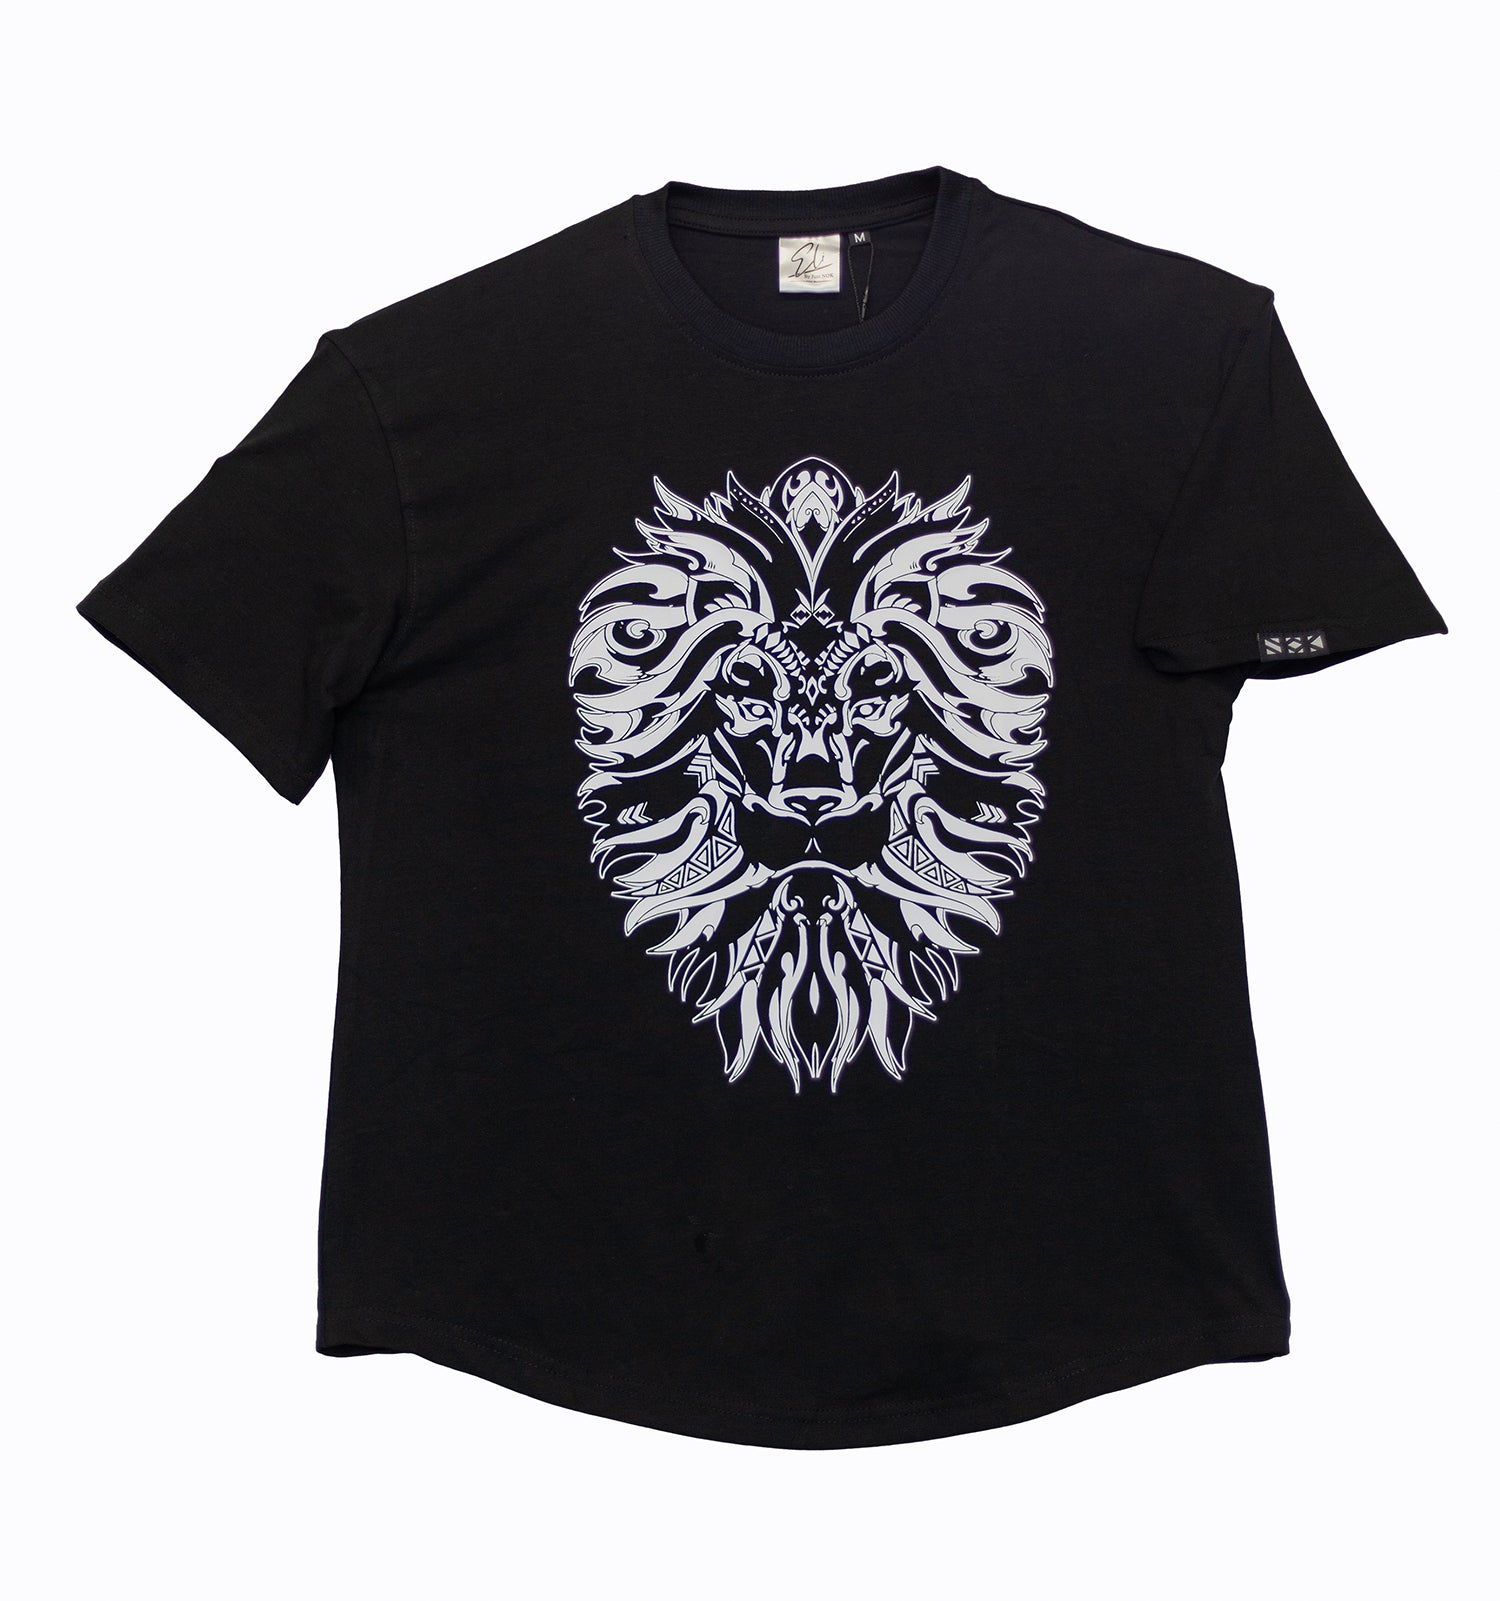 The Lion Face t-shirt from Eli-by-NOK